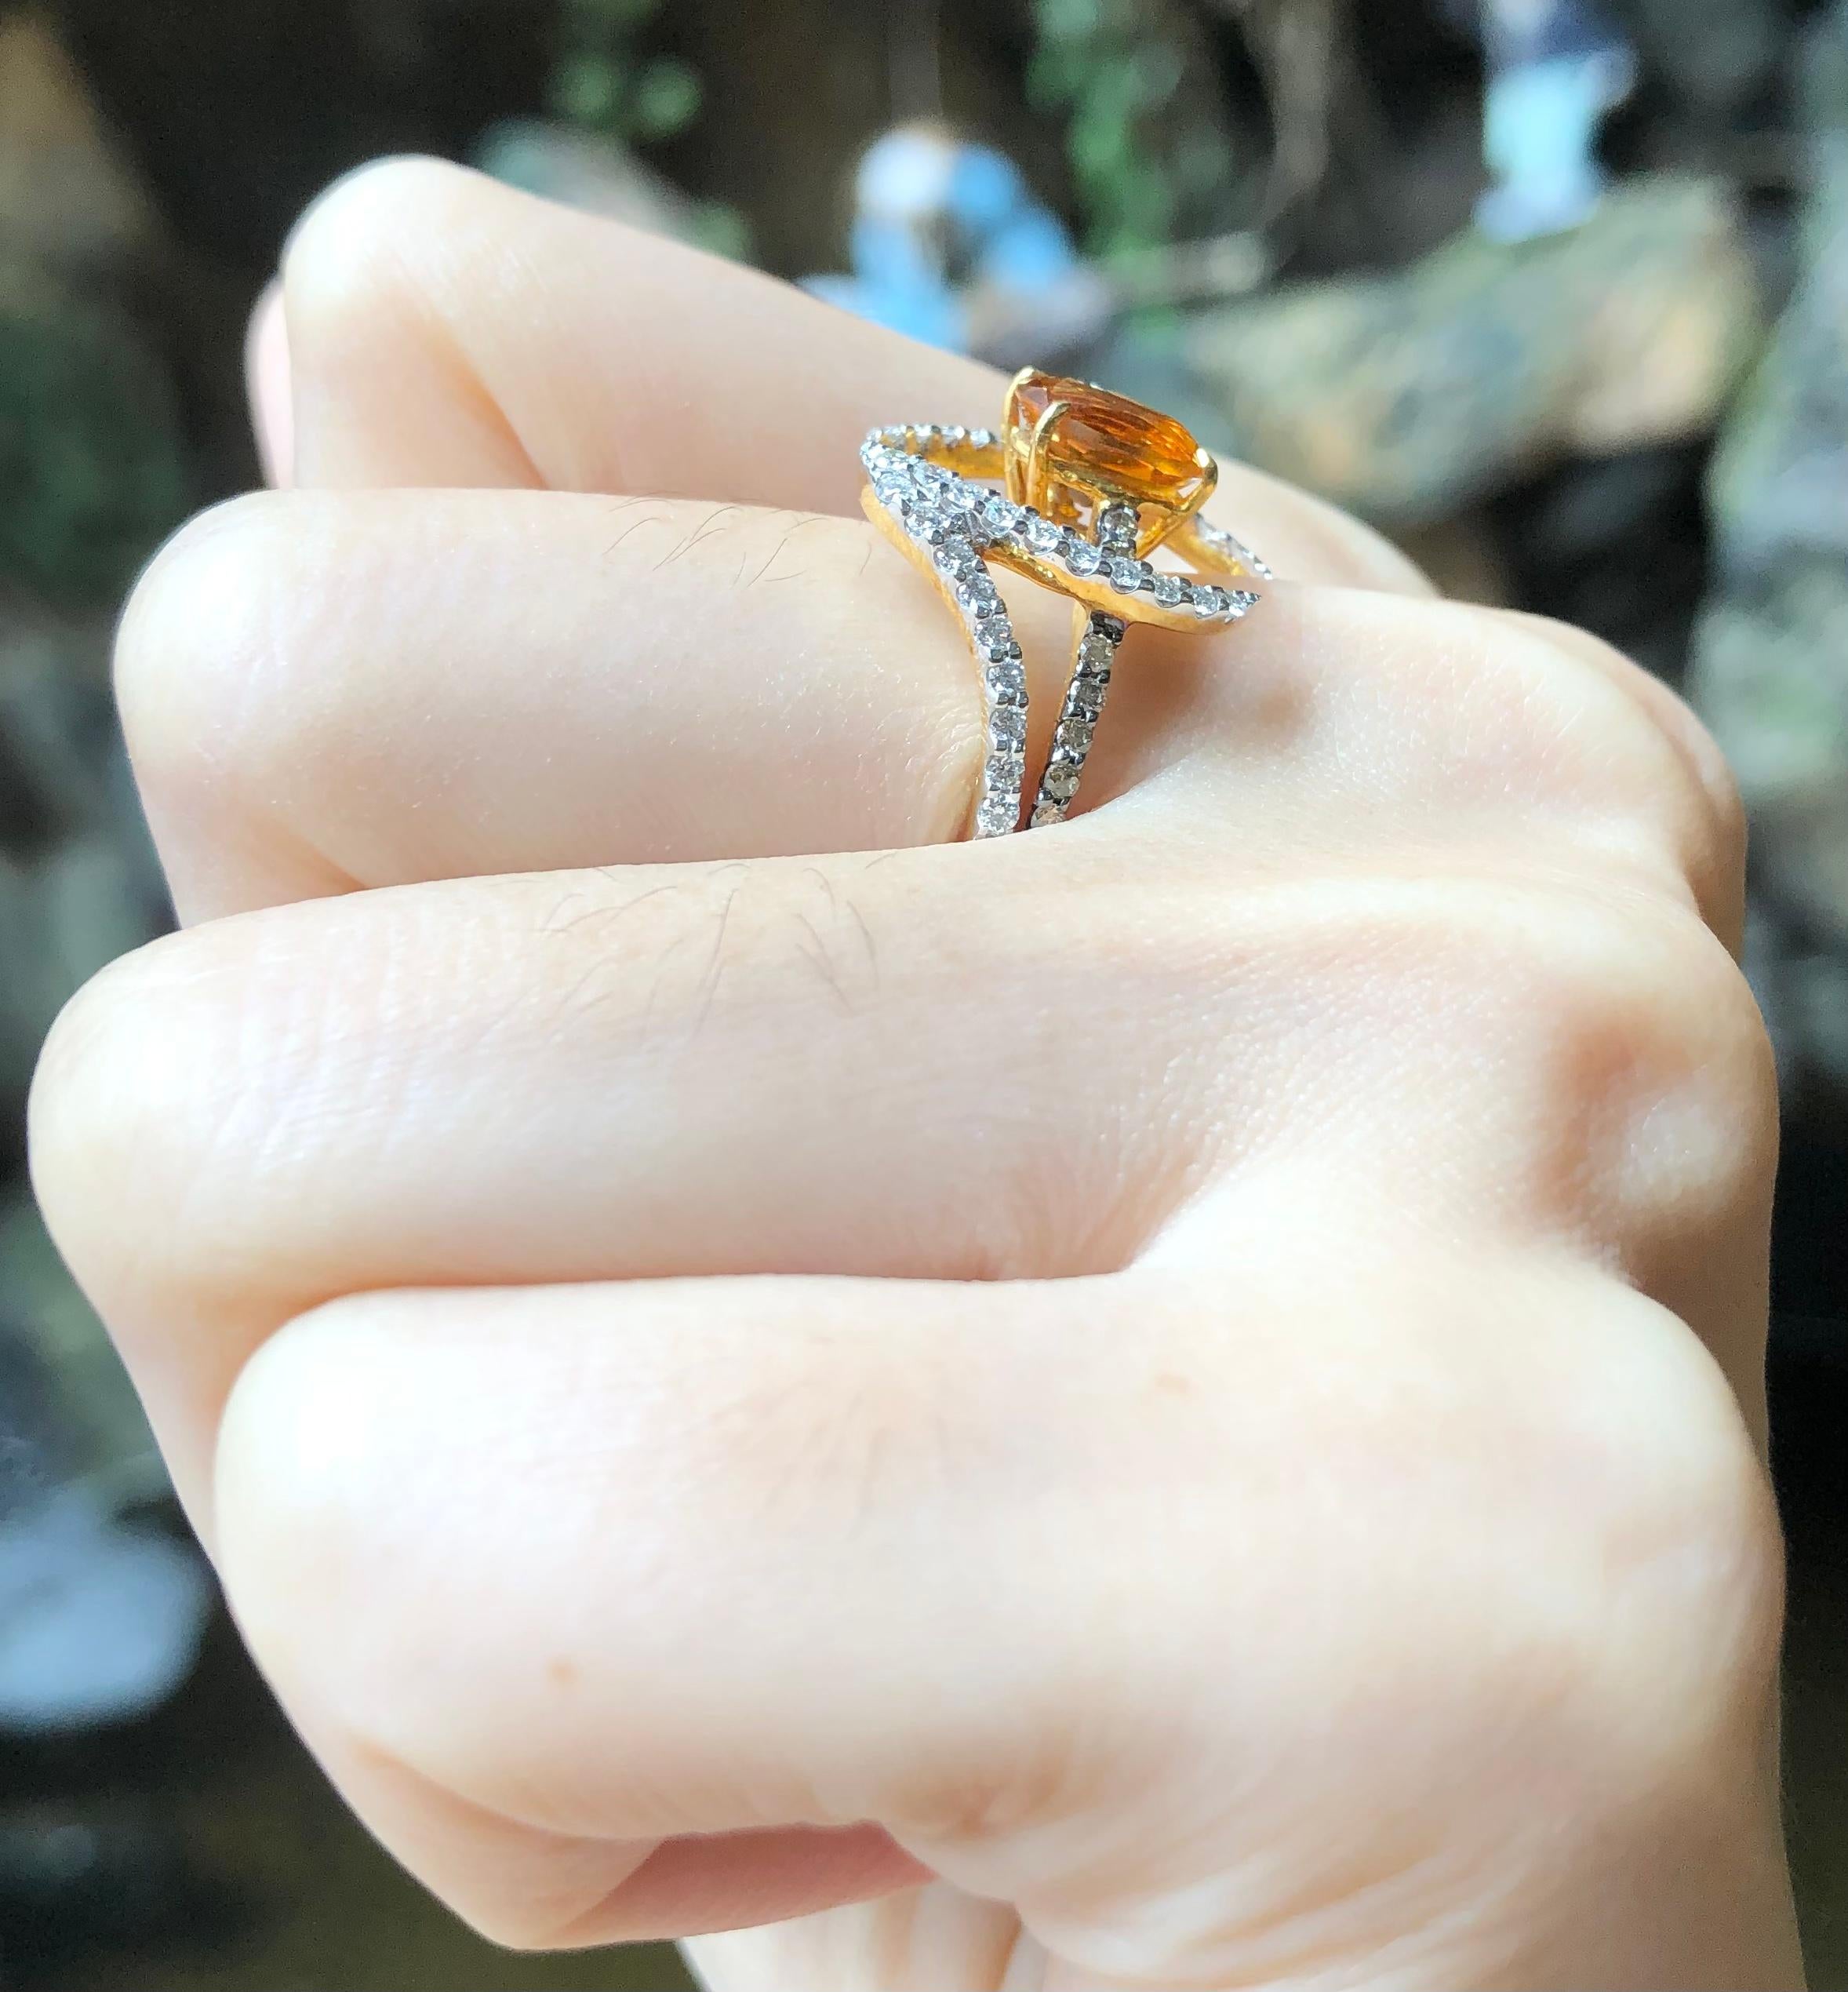 Citrine, Brown Diamond and Diamond Ring Set in 18k Gold by Kavant & Sharart 2